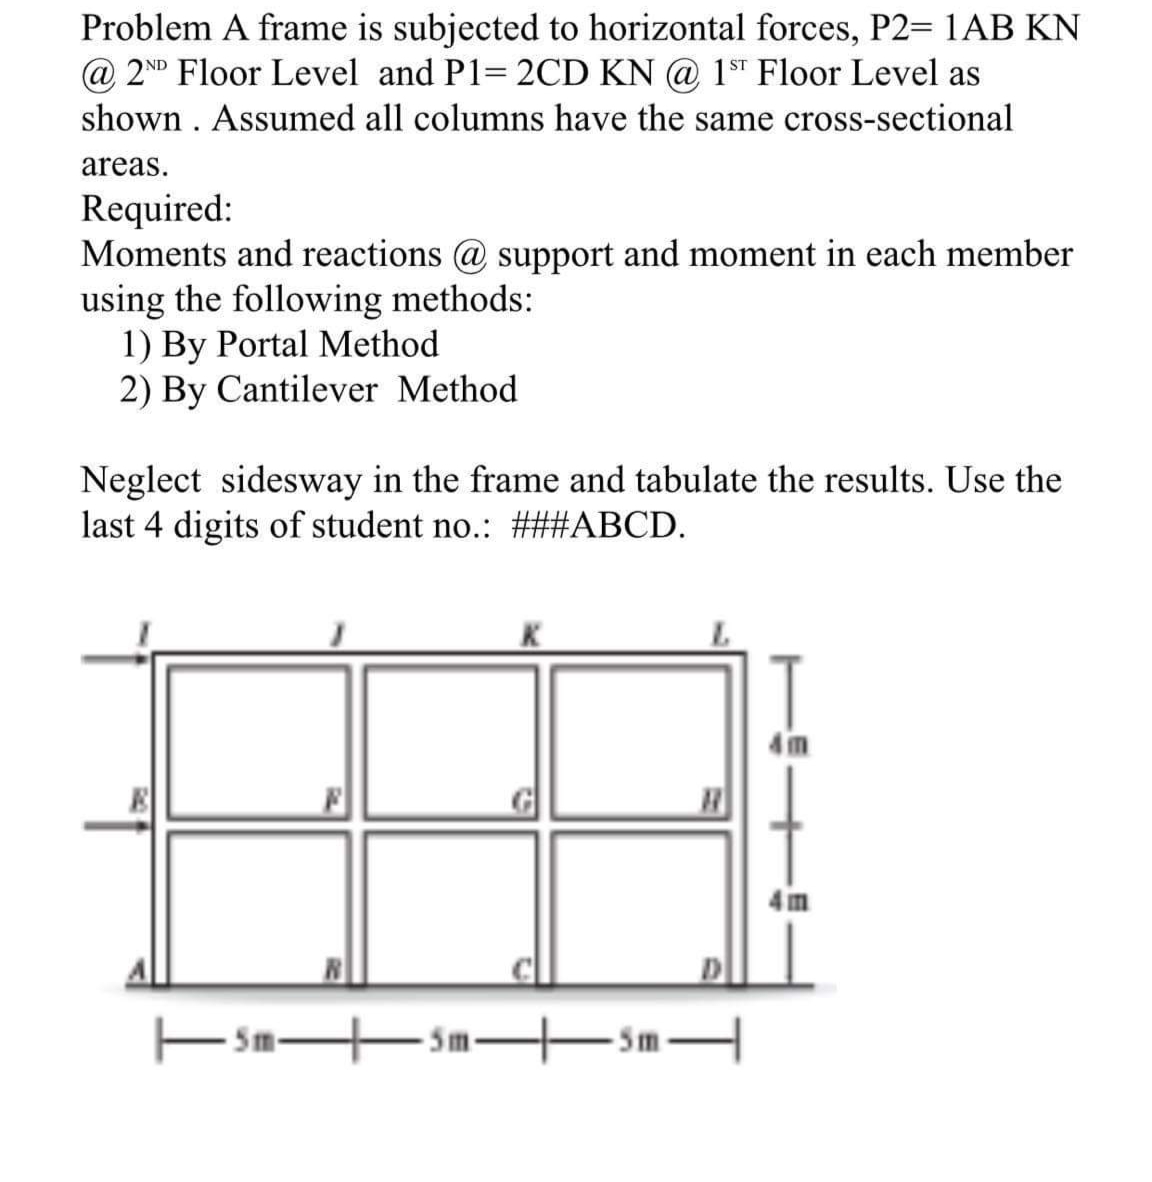 Problem A frame is subjected to horizontal forces, P2= 1AB KN
@ 2ND Floor Level and P1= 2CD KN @ 1ST Floor Level as
shown . Assumed all columns have the same cross-sectional
areas.
Required:
Moments and reactions @ support and moment in each member
using the following methods:
1) By Portal Method
2) By Cantilever Method
Neglect sidesway in the frame and tabulate the results. Use the
last 4 digits of student no.: ###ABCD.
T
4 m
4 im
5m-
